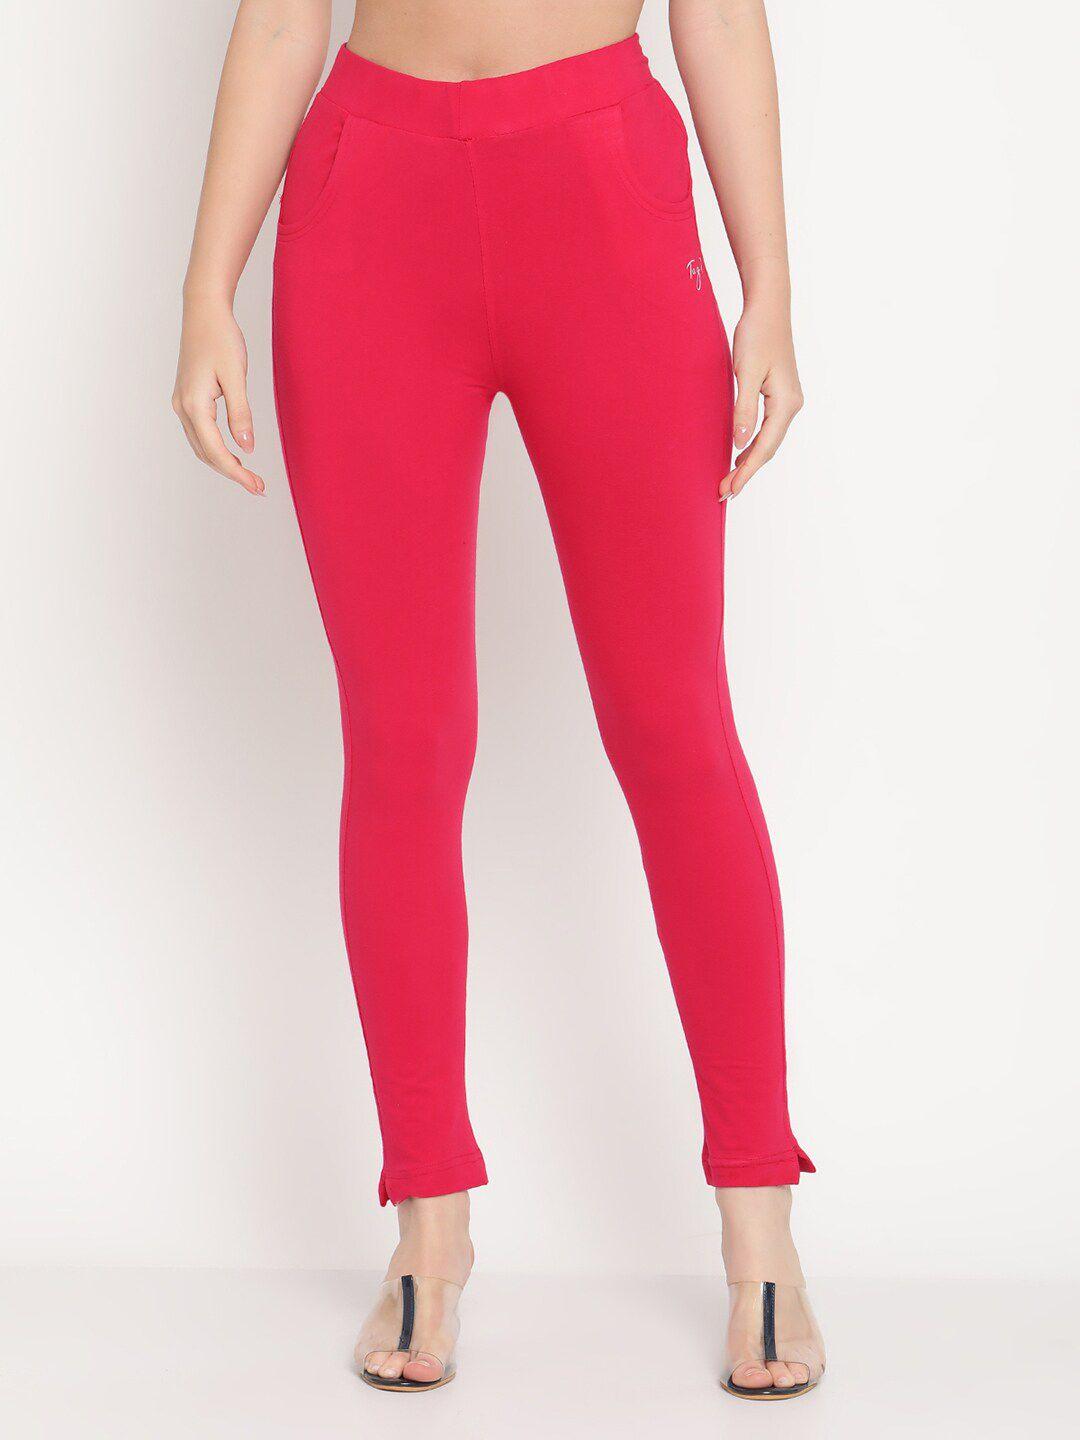 tag 7 women pink solid comfort-fit jeggings